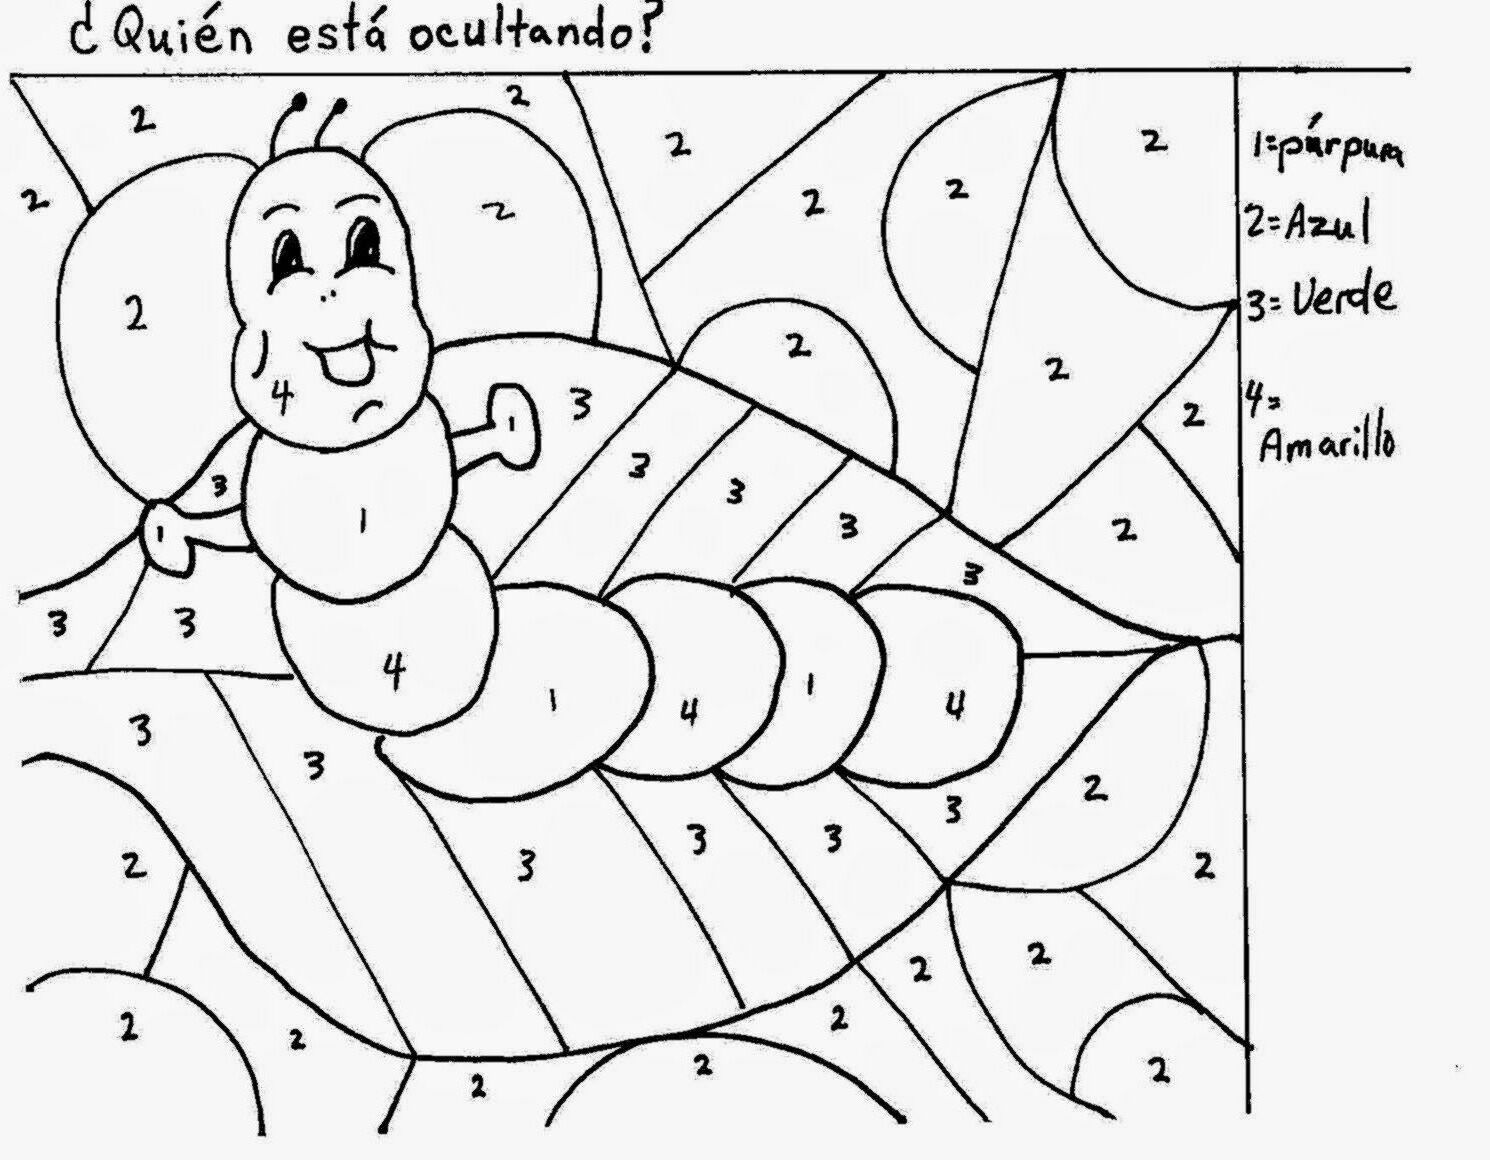 Spanish Colors Coloring Worksheet Sketch Coloring Page